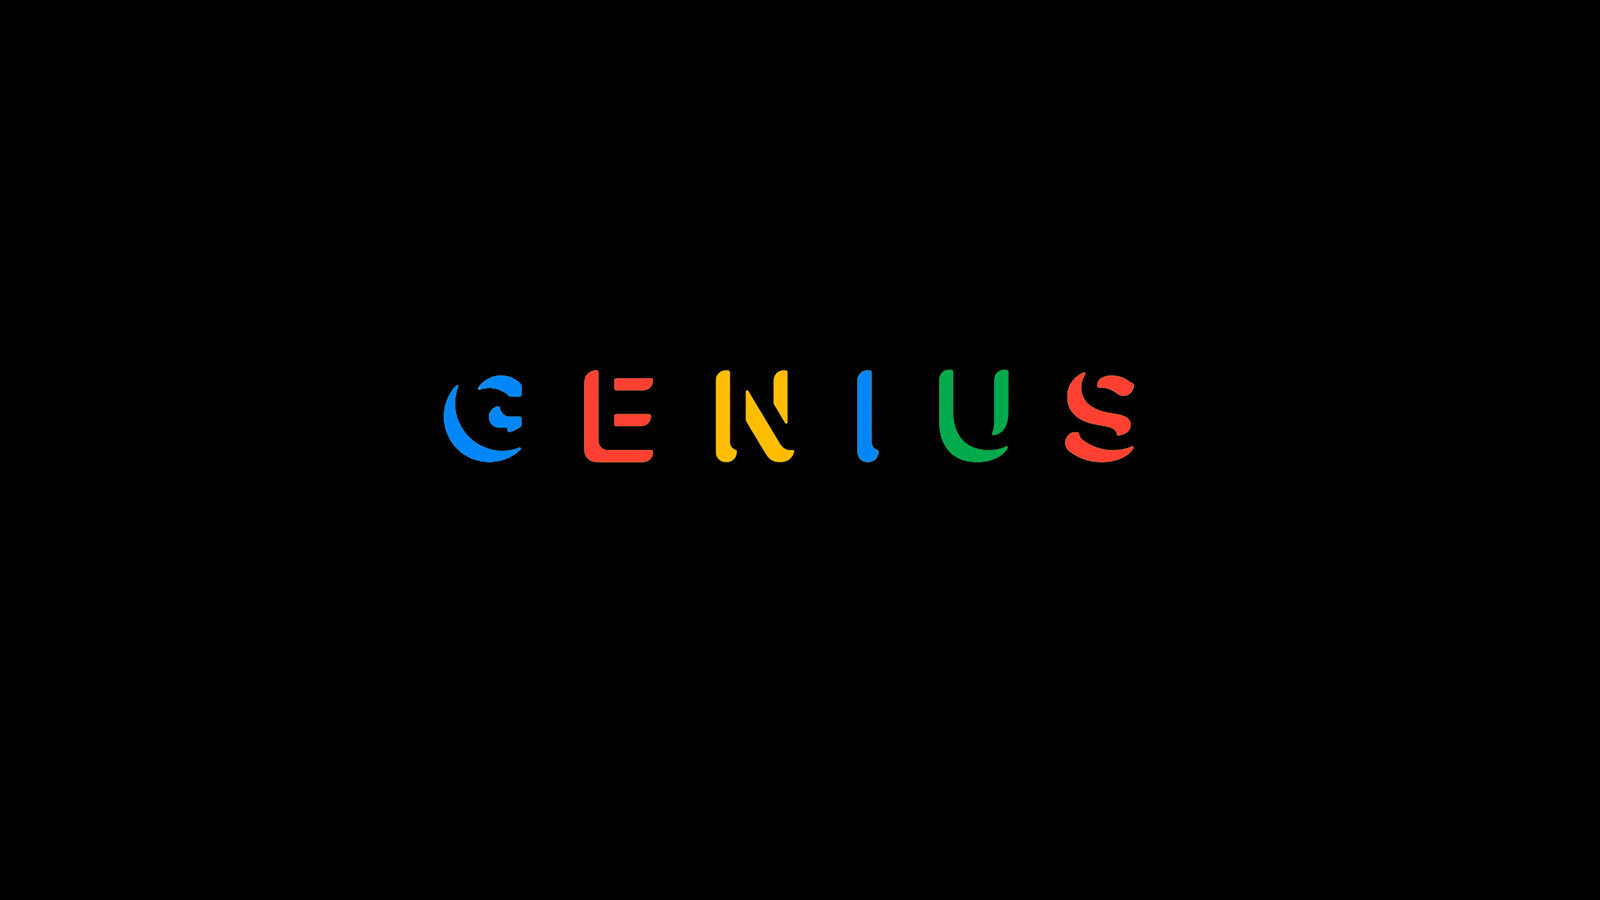   Genius says it caught Google stealing content with Morse code  